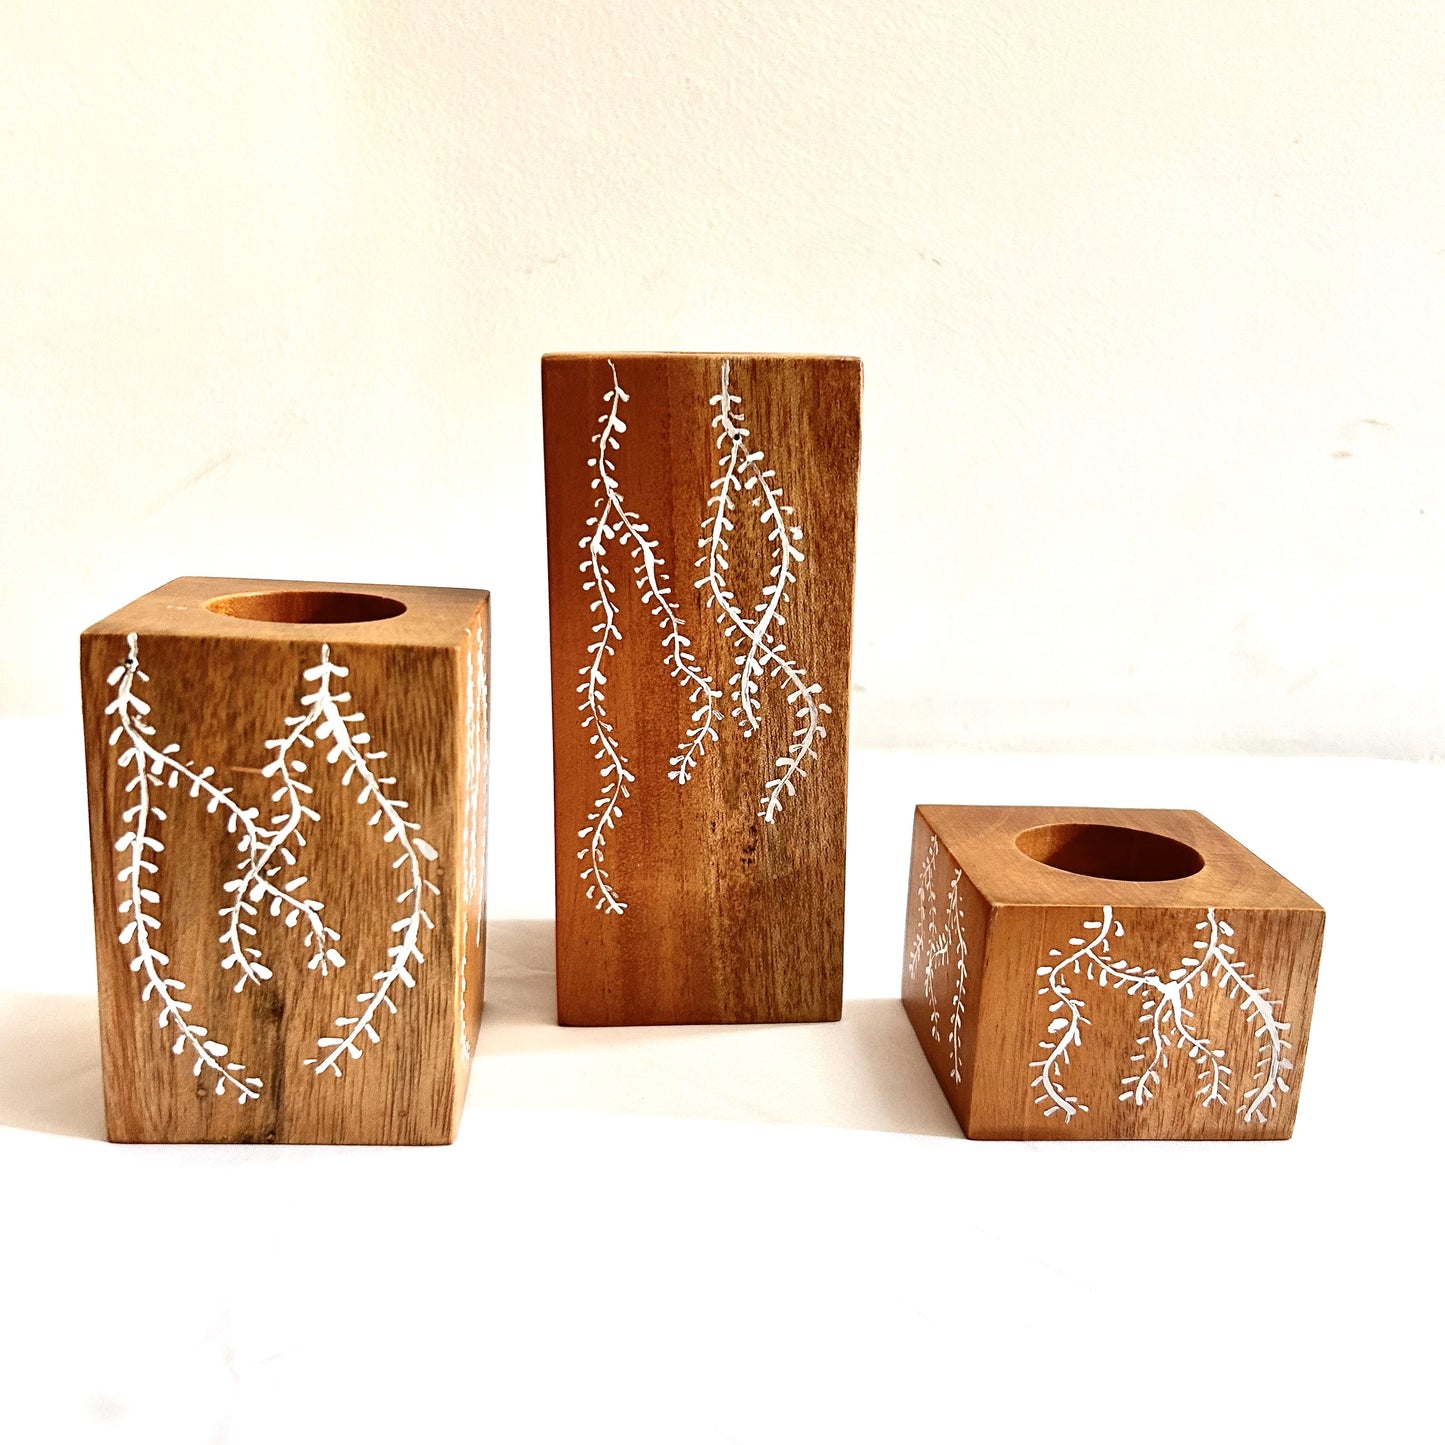 Handcrafted set of 3 candle holders made of Natural solid mahogany wood is a perfect way to make your rooms cozy and beautiful. Hand-drawn with beautiful motifs when placed on a coffee/dining/corner table, accents the beauty,  brightens the space making the room welcoming, calm and peaceful. These candle holders of different heights could be arranged in any way as per the space it is kept.  Rustic decor accessories, gifting for birthday, wedding anniversary, housewarming. 